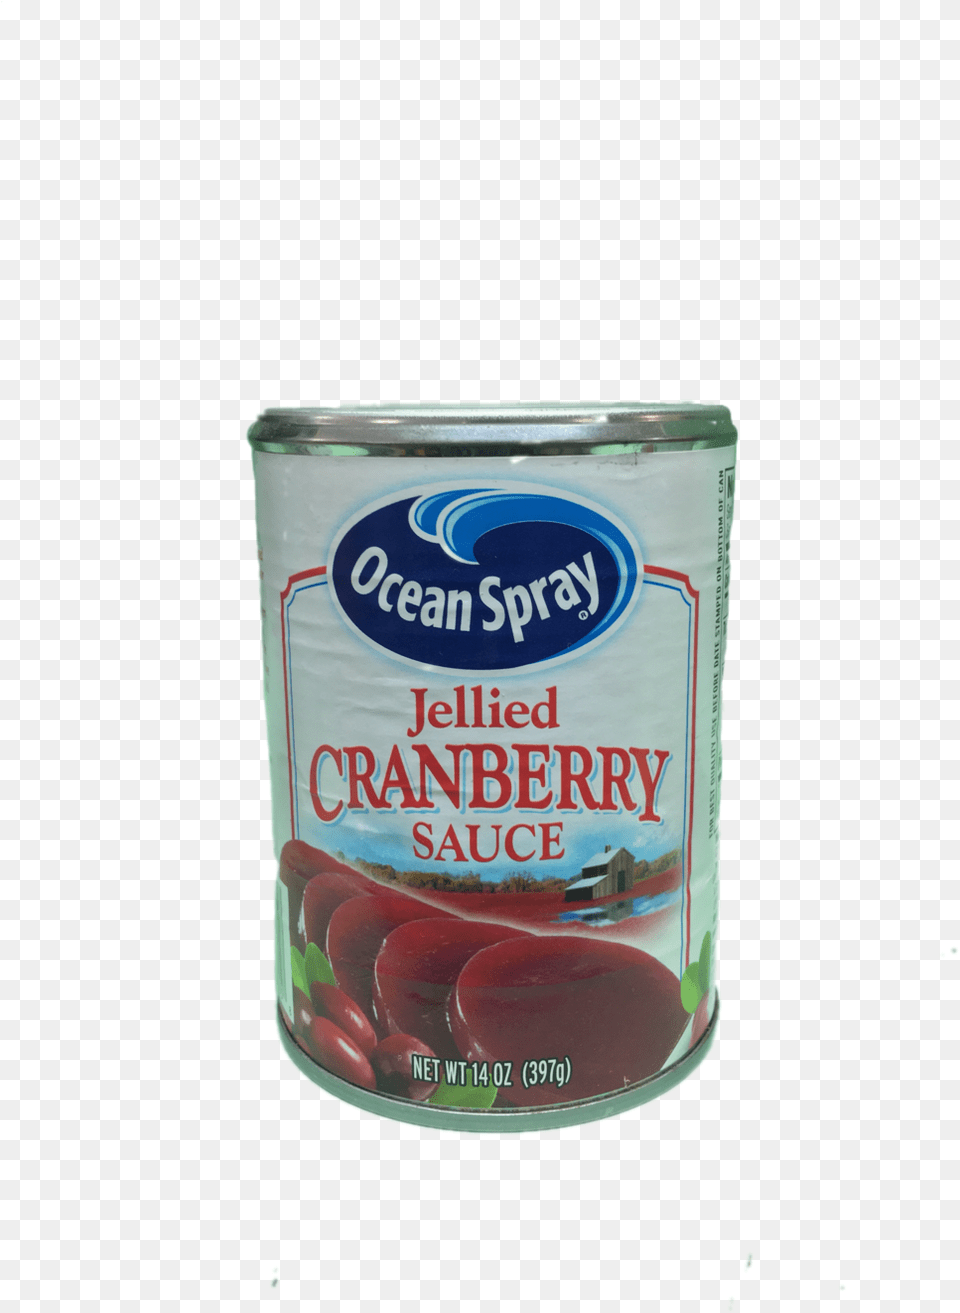 Ocean Spray Jellied Cranberry Sauce 14 Oz, Tin, Can, Aluminium, Canned Goods Free Png Download